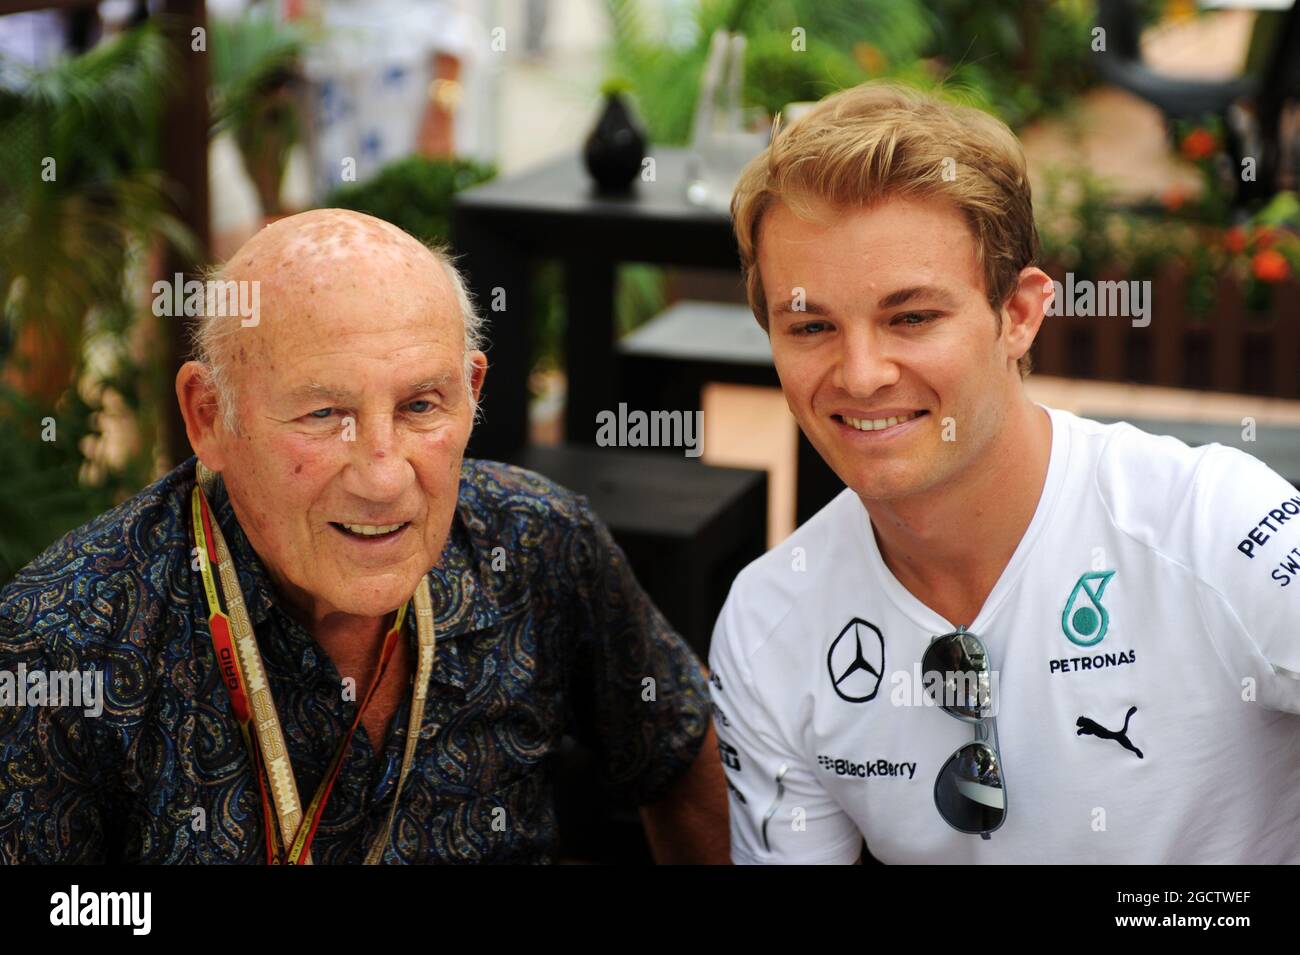 (L to R): Stirling Moss (GBR) with Nico Rosberg (GER) Mercedes AMG F1. Singapore Grand Prix, Sunday 21st September 2014. Marina Bay Street Circuit, Singapore. Stock Photo